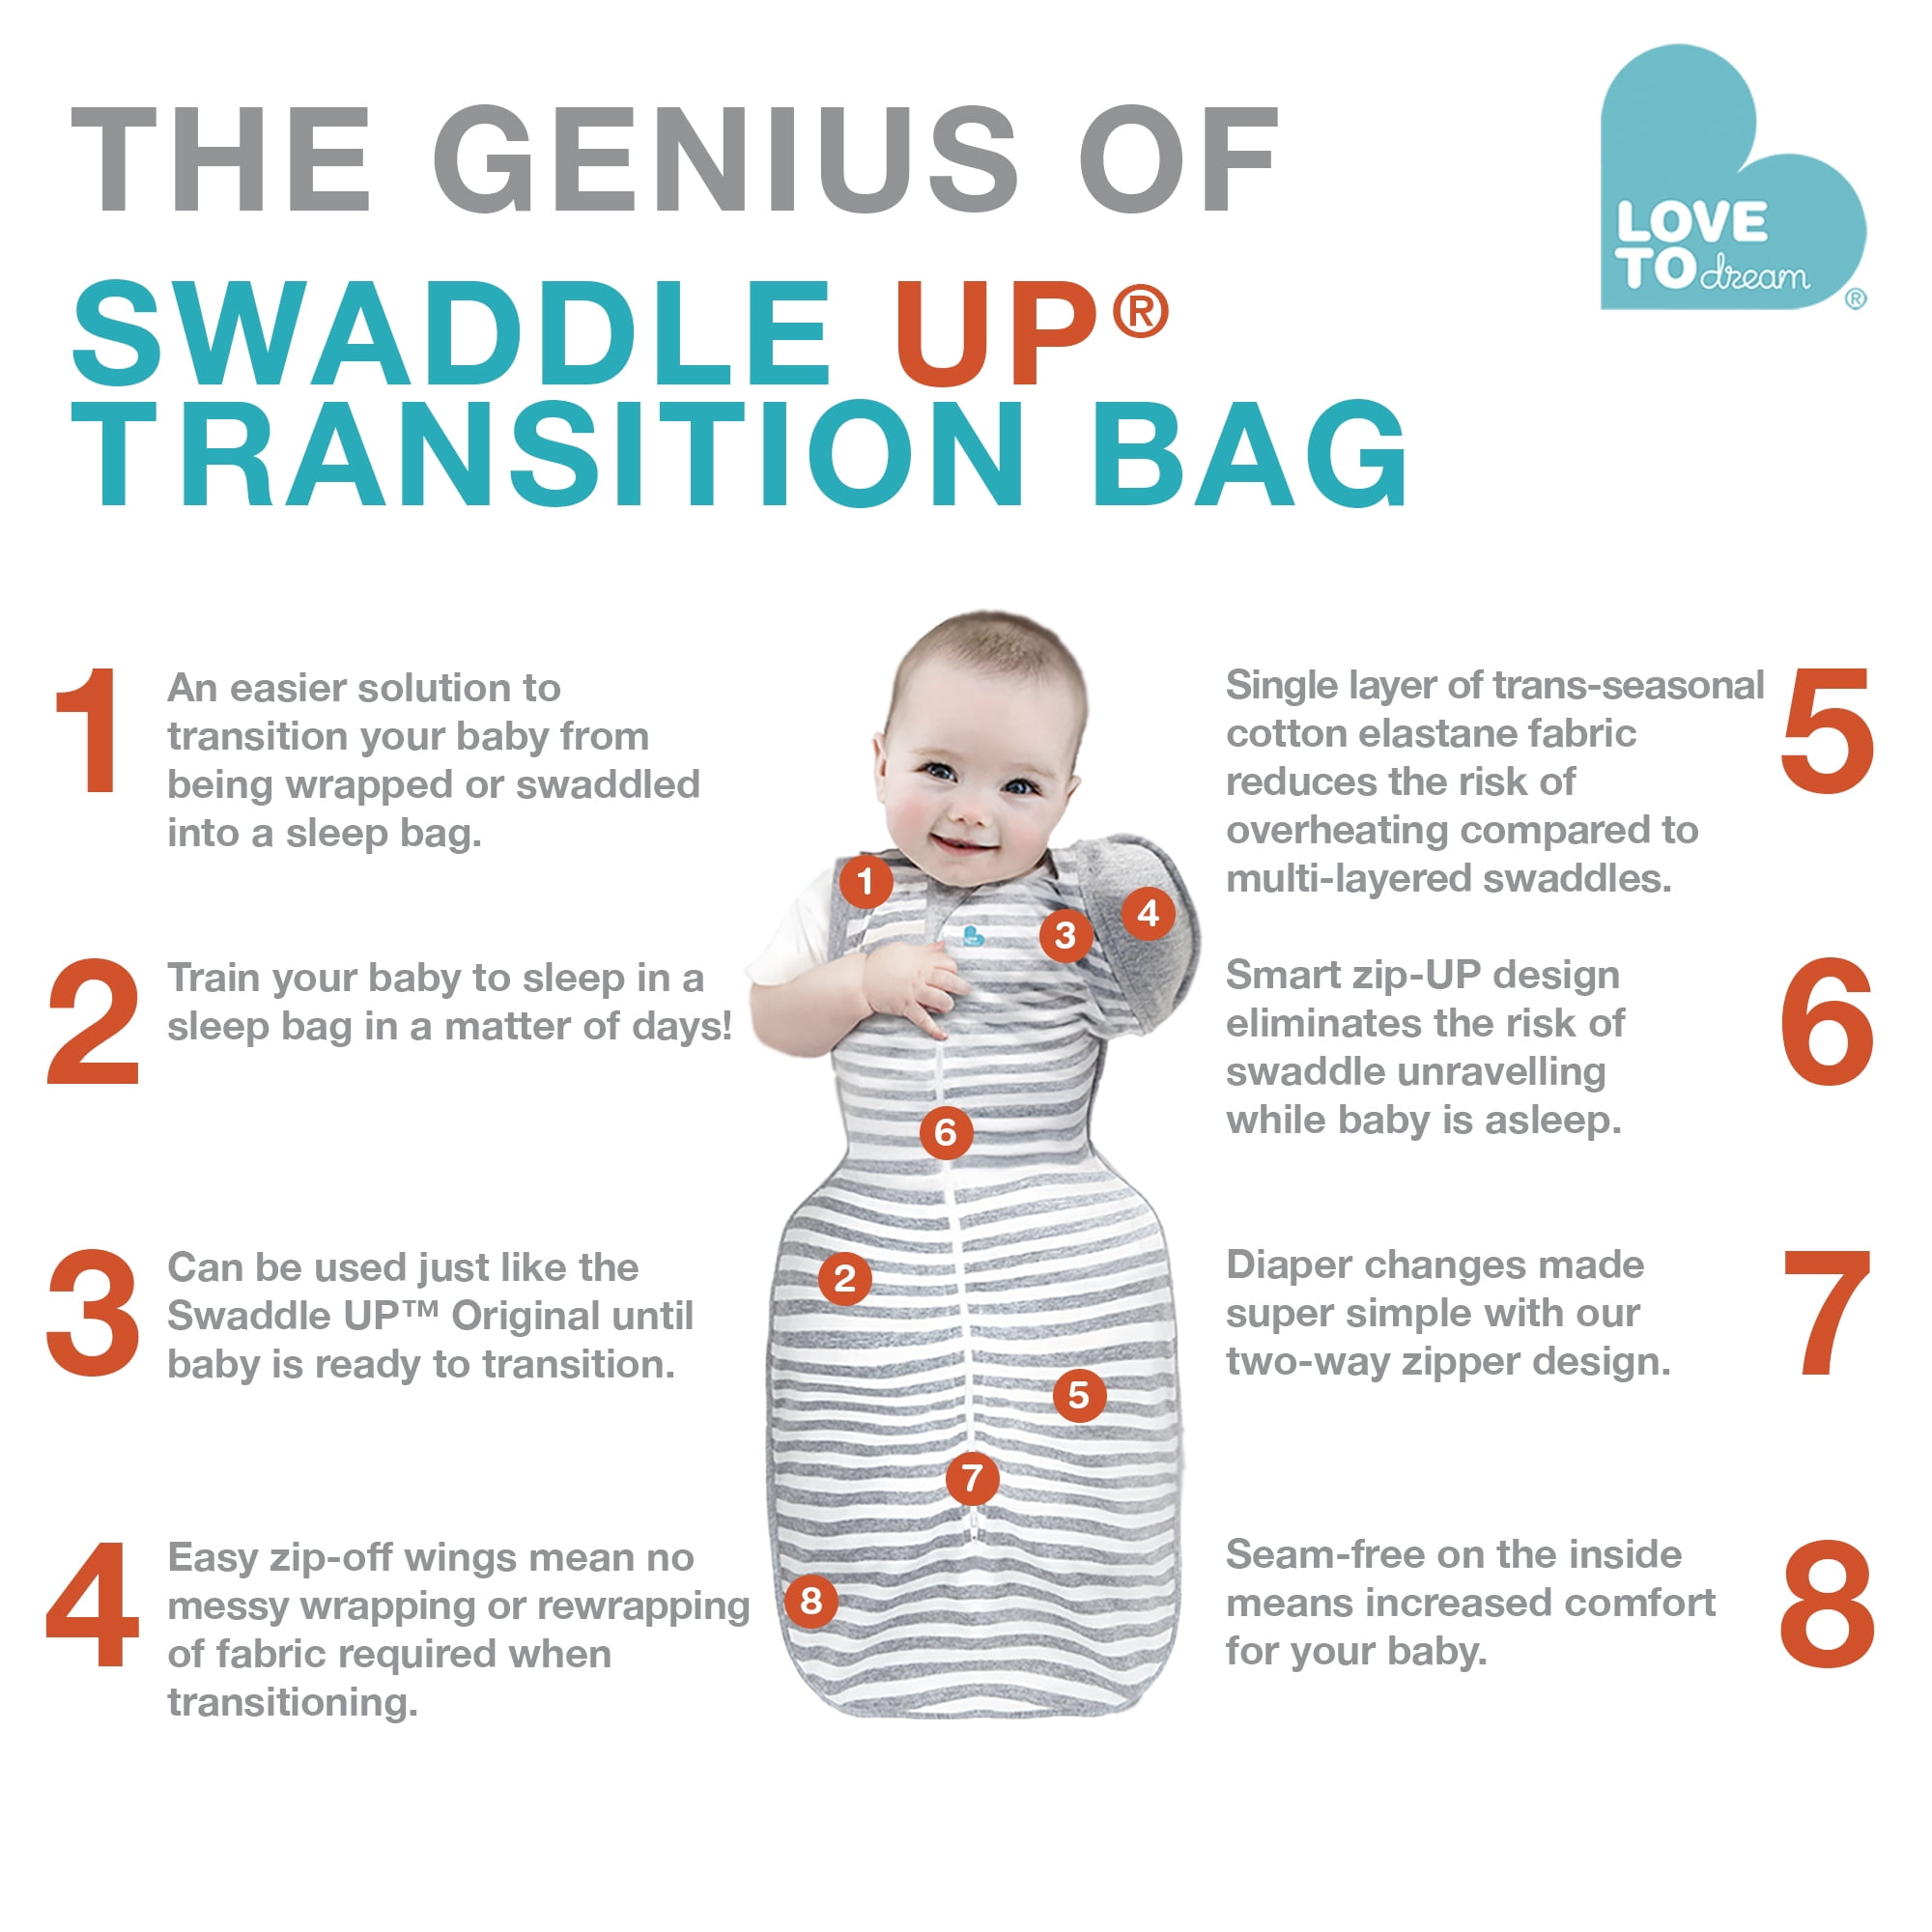  Love to Dream Swaddle UP Transition Bag Warm 2.5 TOG, Pink  Silly Goose, Medium 8-13lbs, Patented Zip-Off Wings, Gently Help Baby  Safely Transition from Being Swaddled to Arms Free Before Rolling 